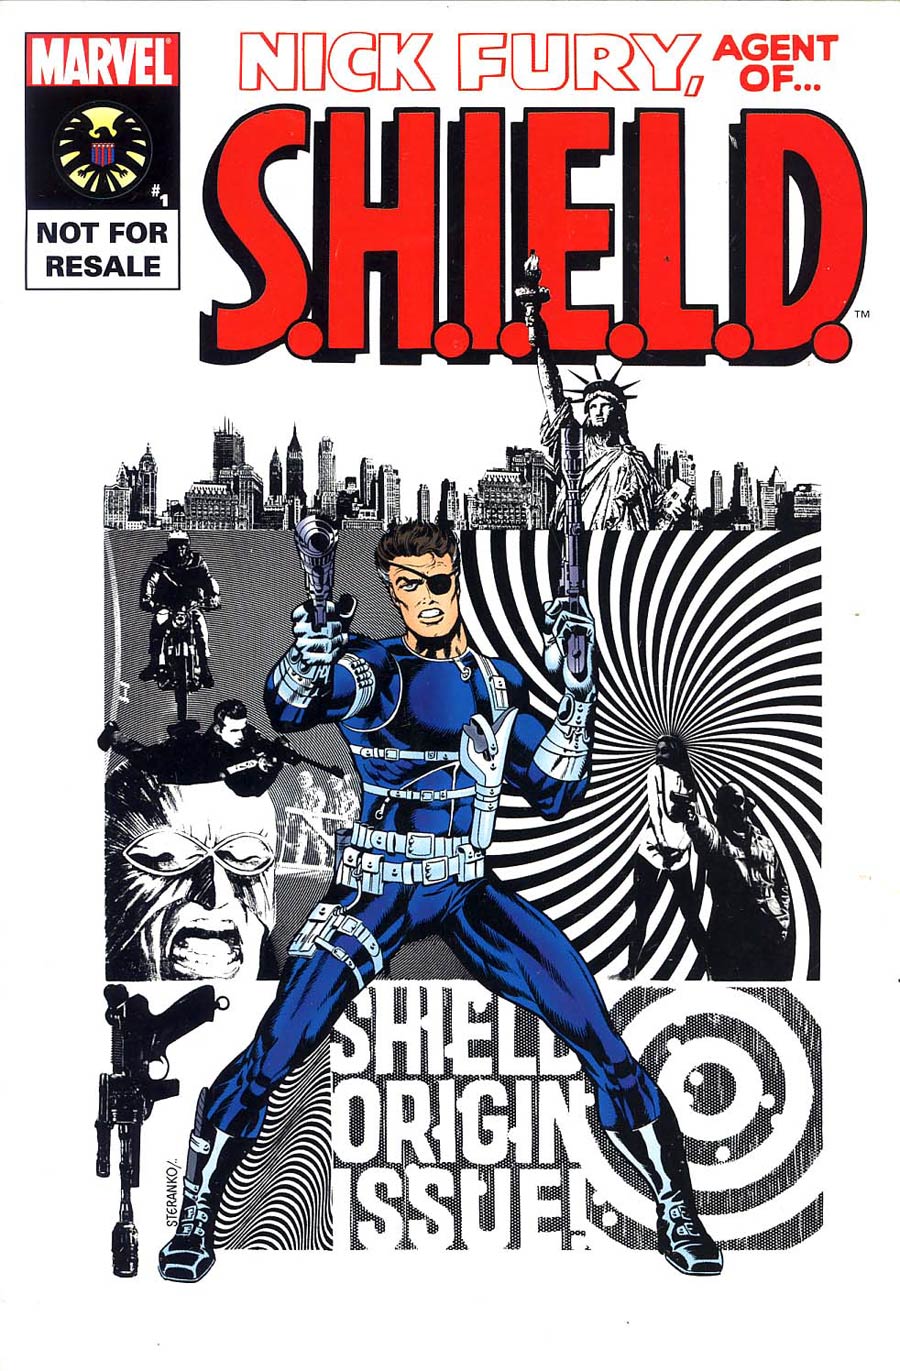 Nick Fury Agent Of SHIELD #1 Cover B Toy Reprint